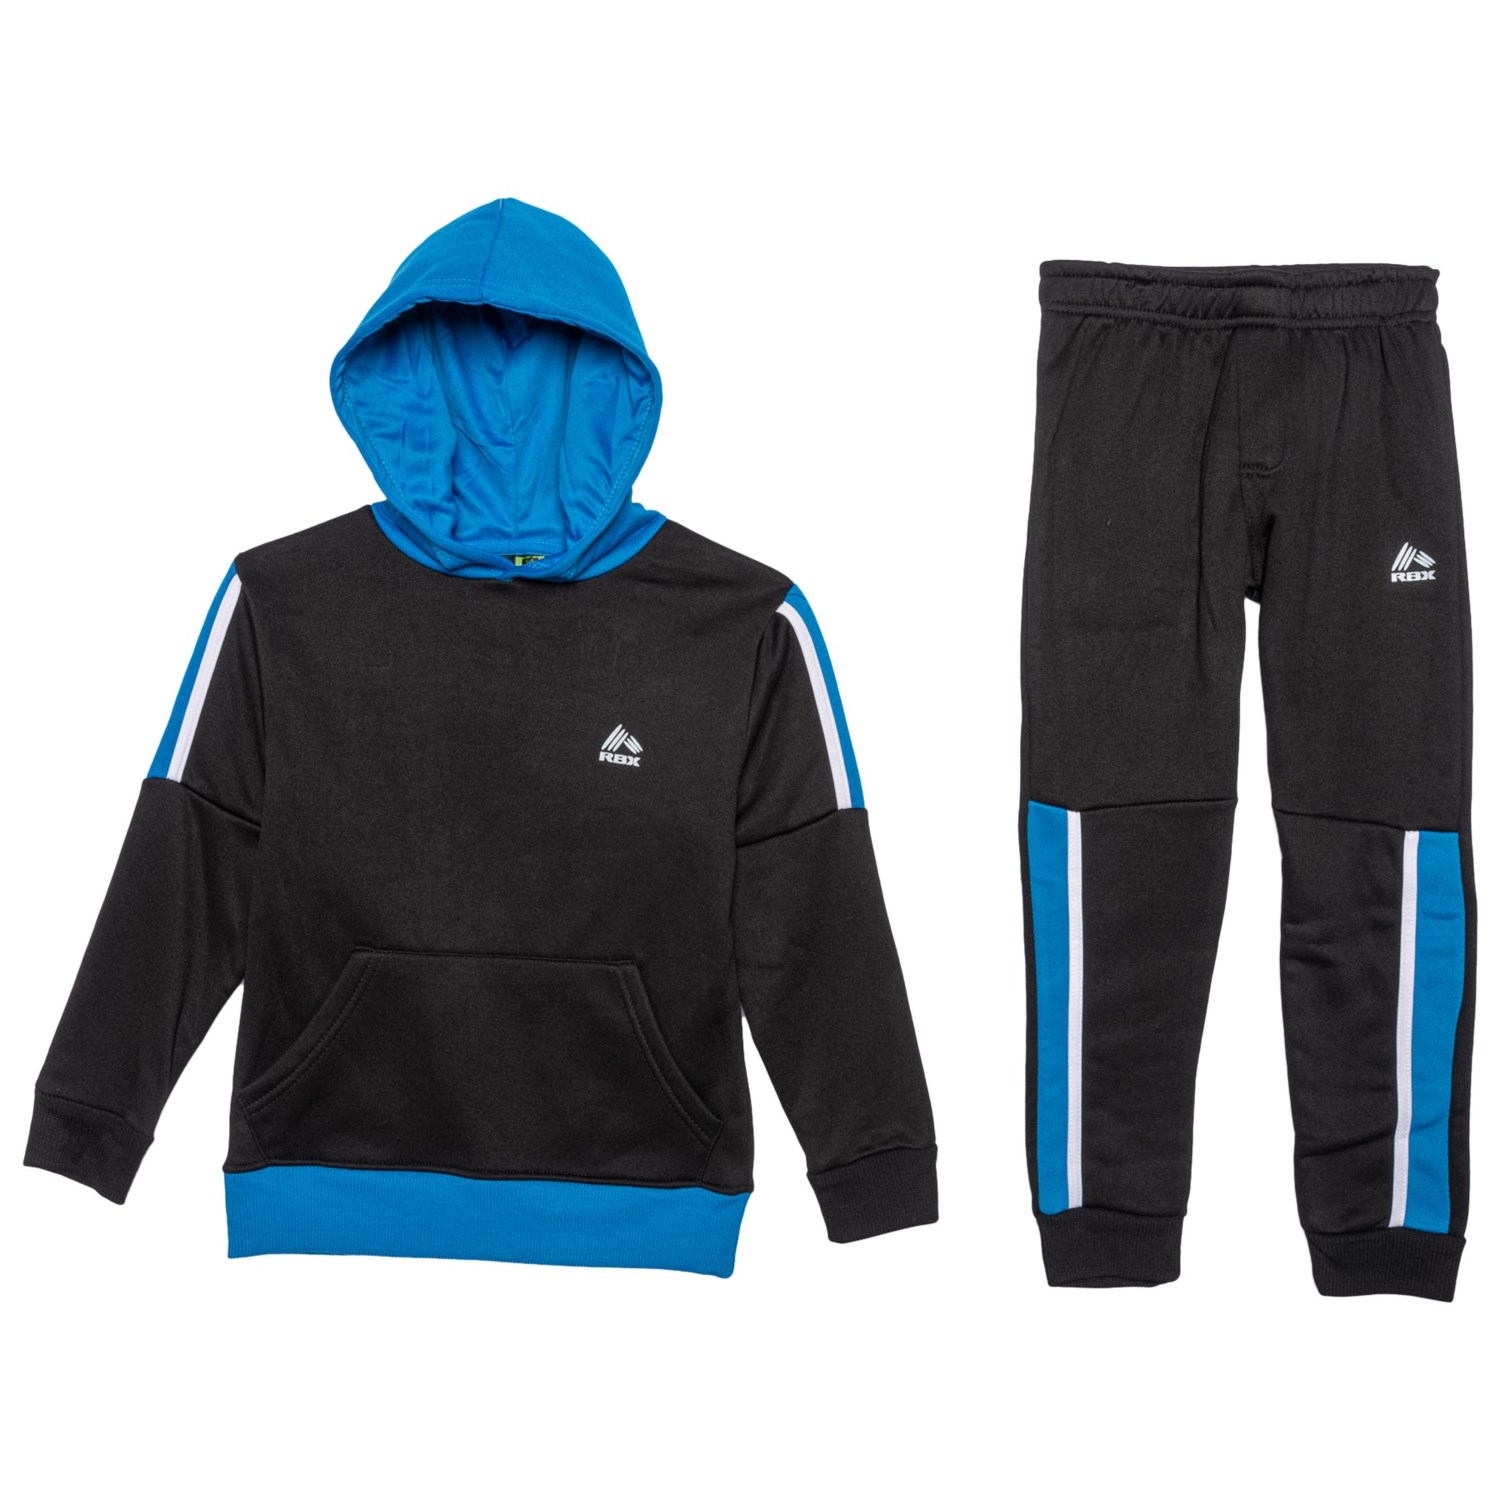 Rbx Fleece Hoodie And Joggers Set For Little Boys Save 27 - rbx gift card